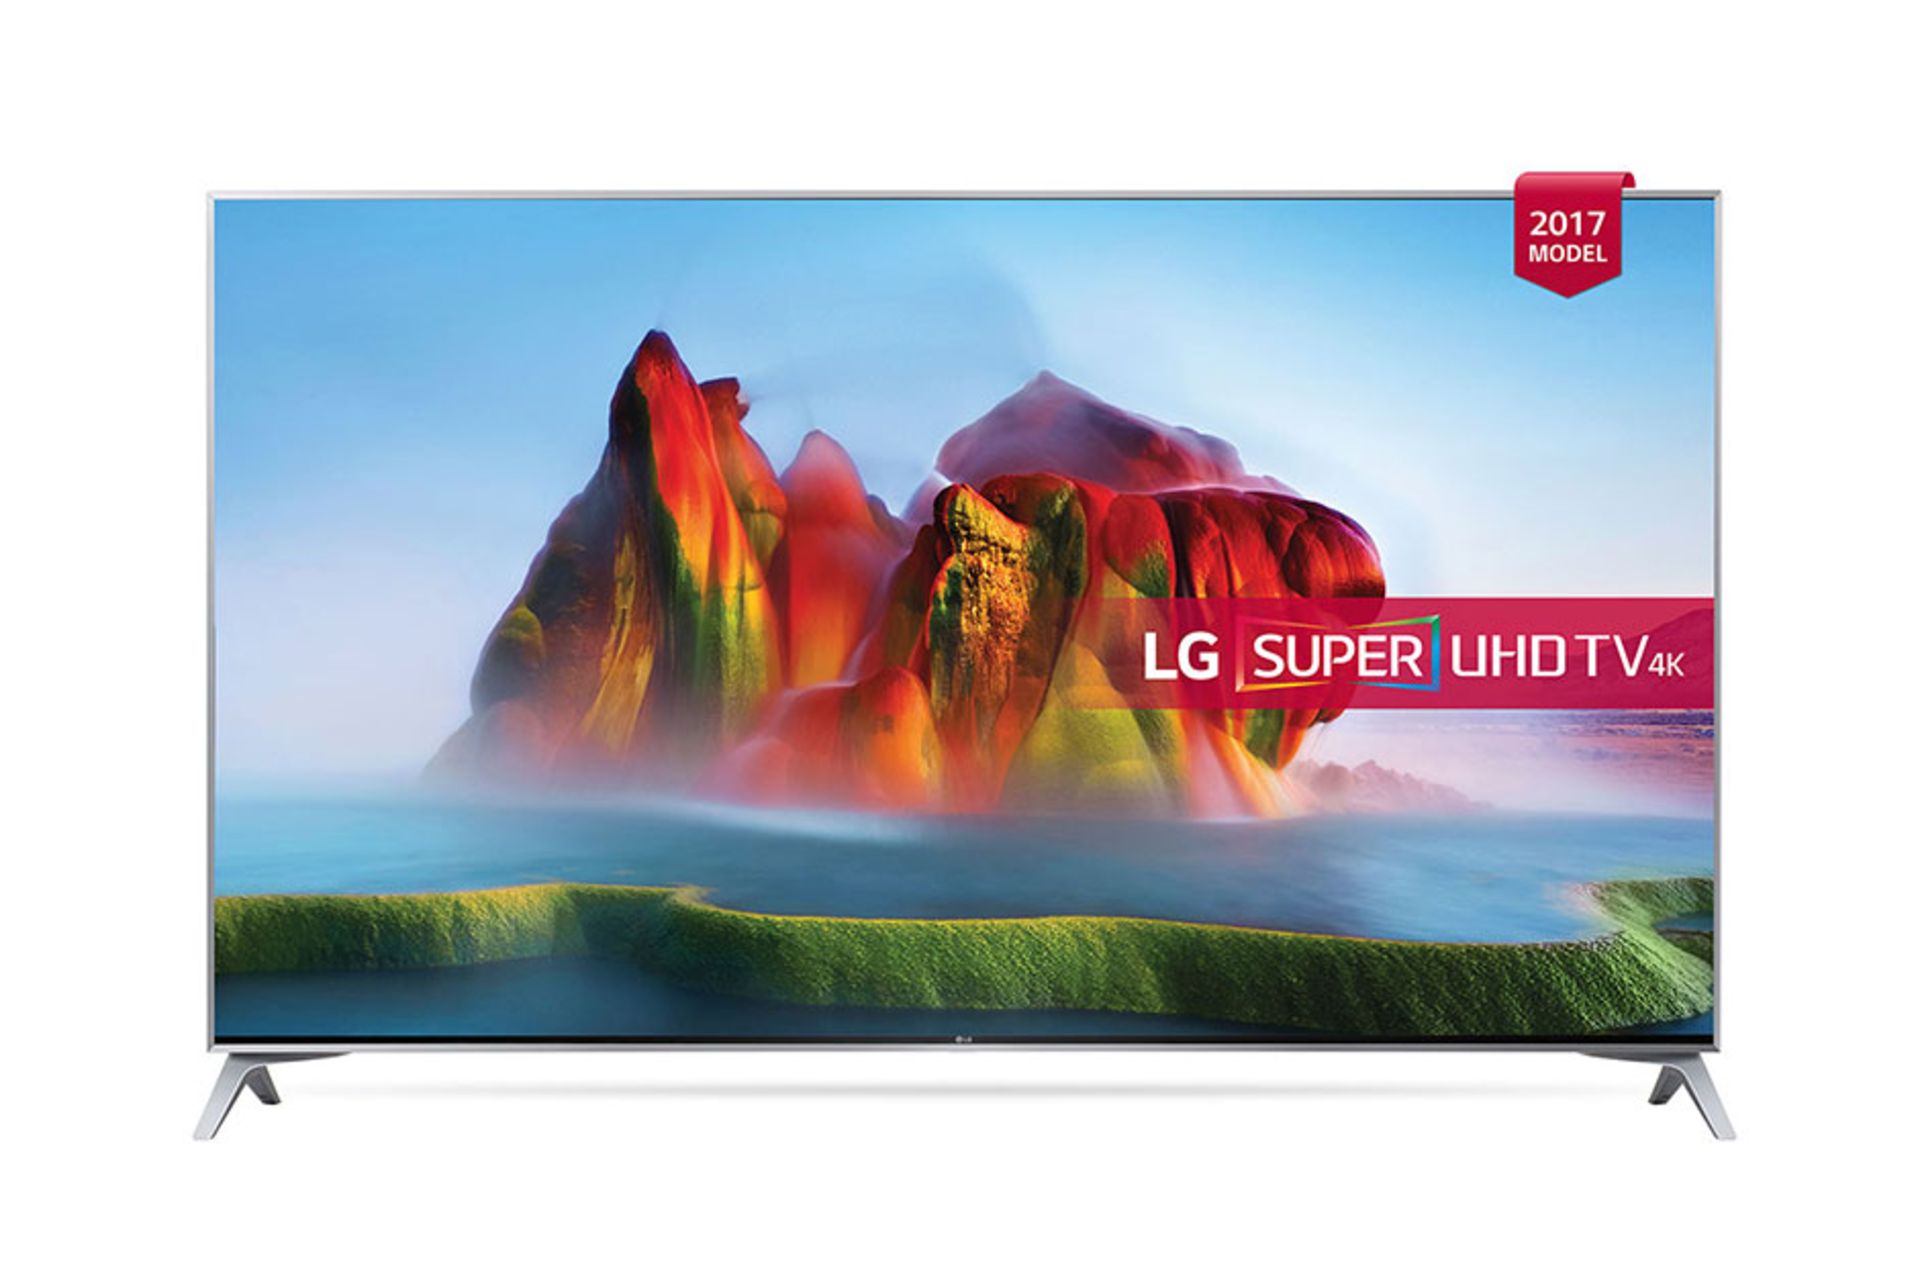 V Grade A LG 55 Inch ACTIVE HDR 4K SUPER ULTRA HD LED SMART TV WITH FREEVIEW HD & WEBOS 3.5 & WIFI -